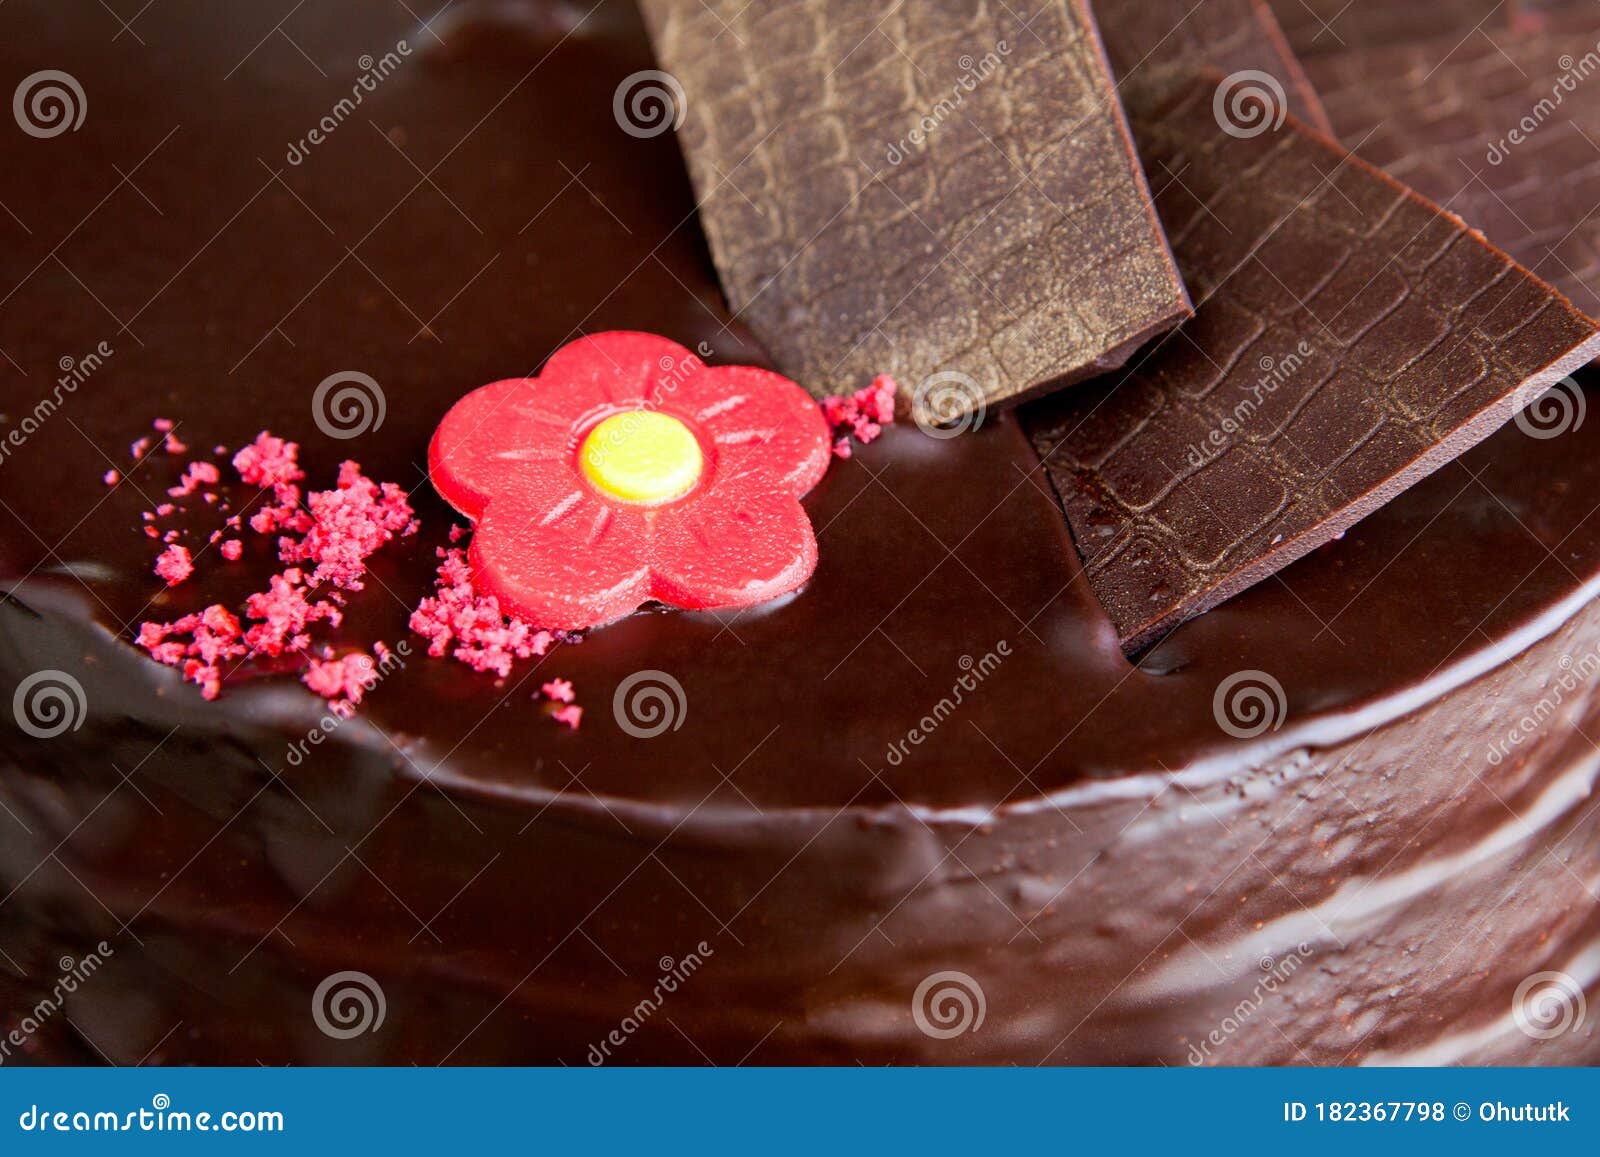 chocolate cake with chocolate ornaments and red marzipan rose